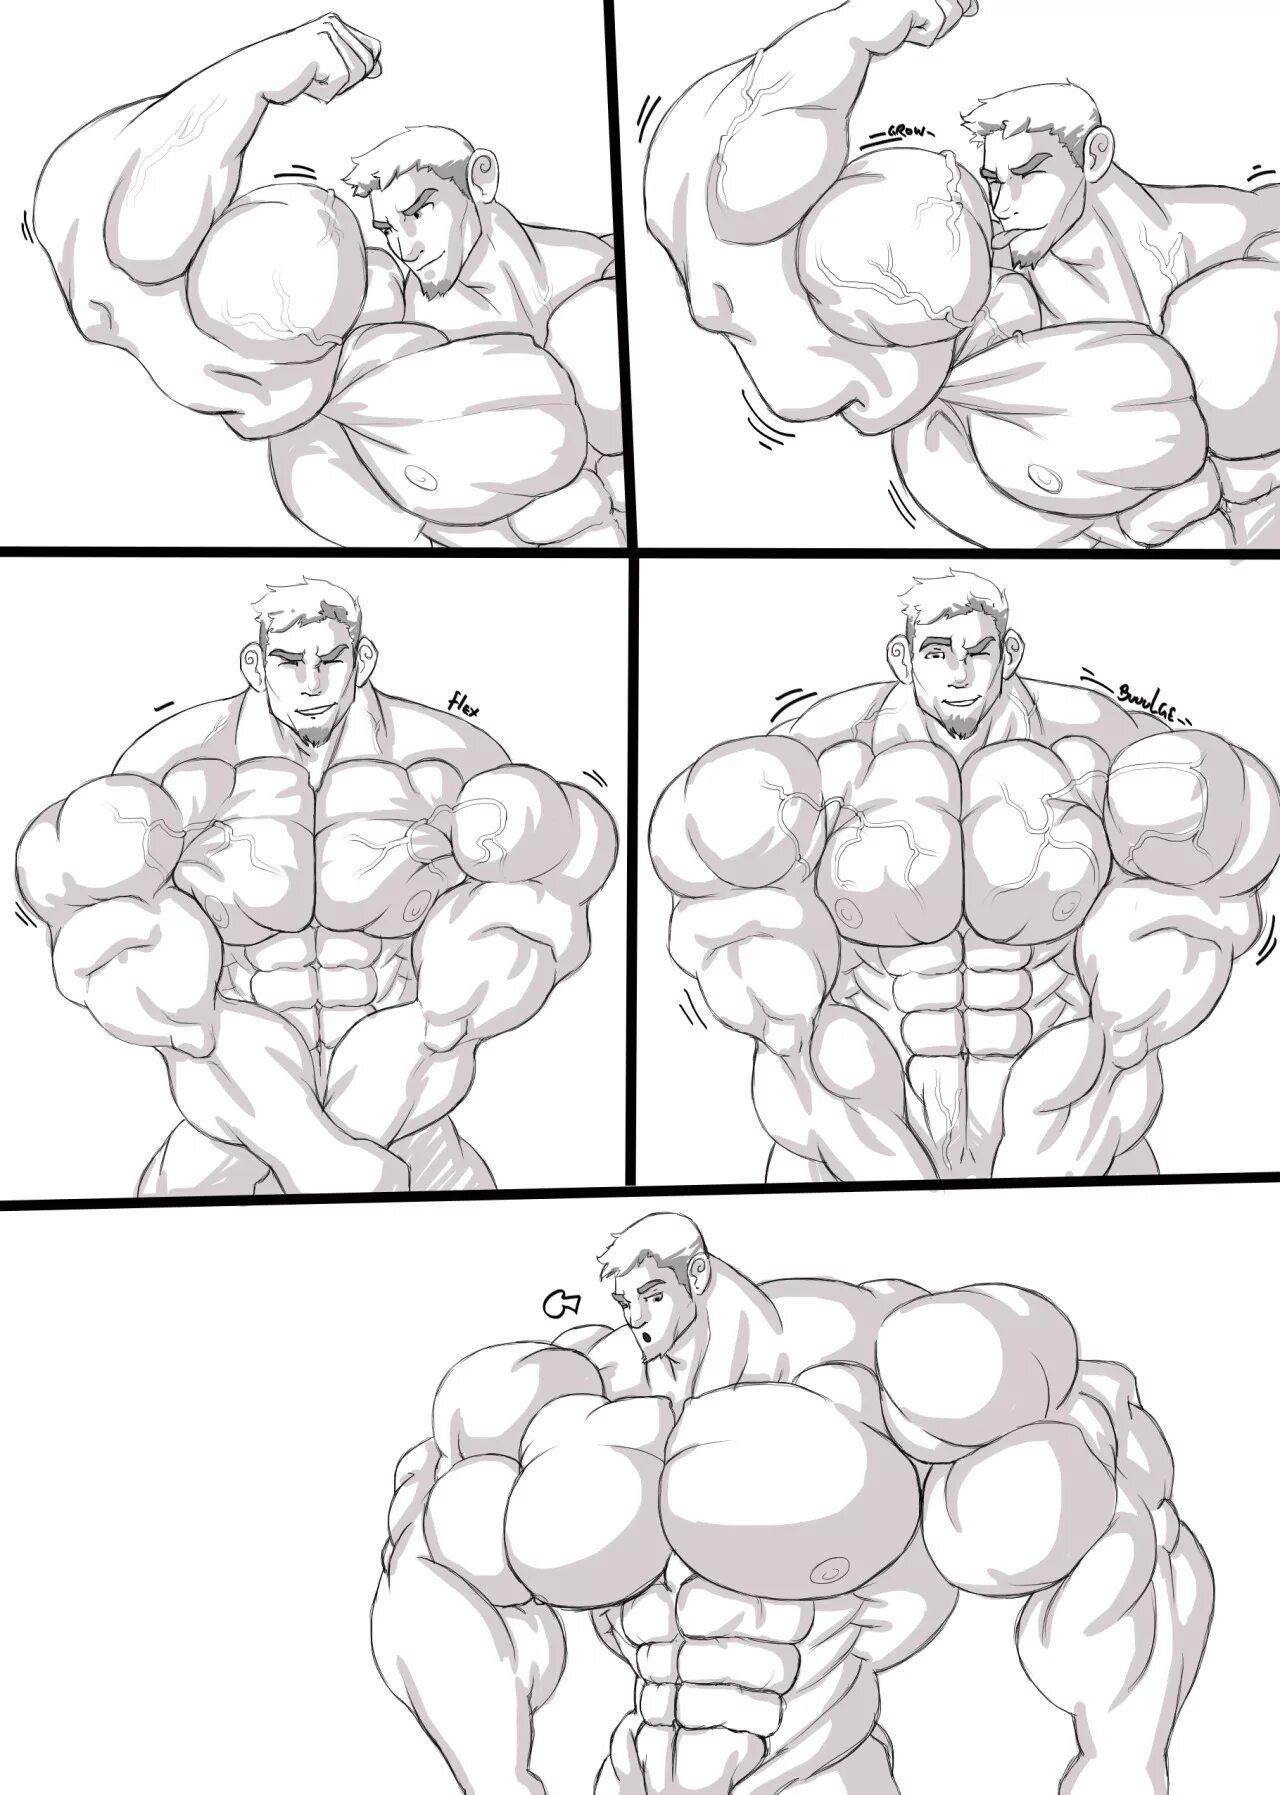 Кольт muscle growth. Muscle growth Дэнни. Фрэнк muscle growth. Dick expansion